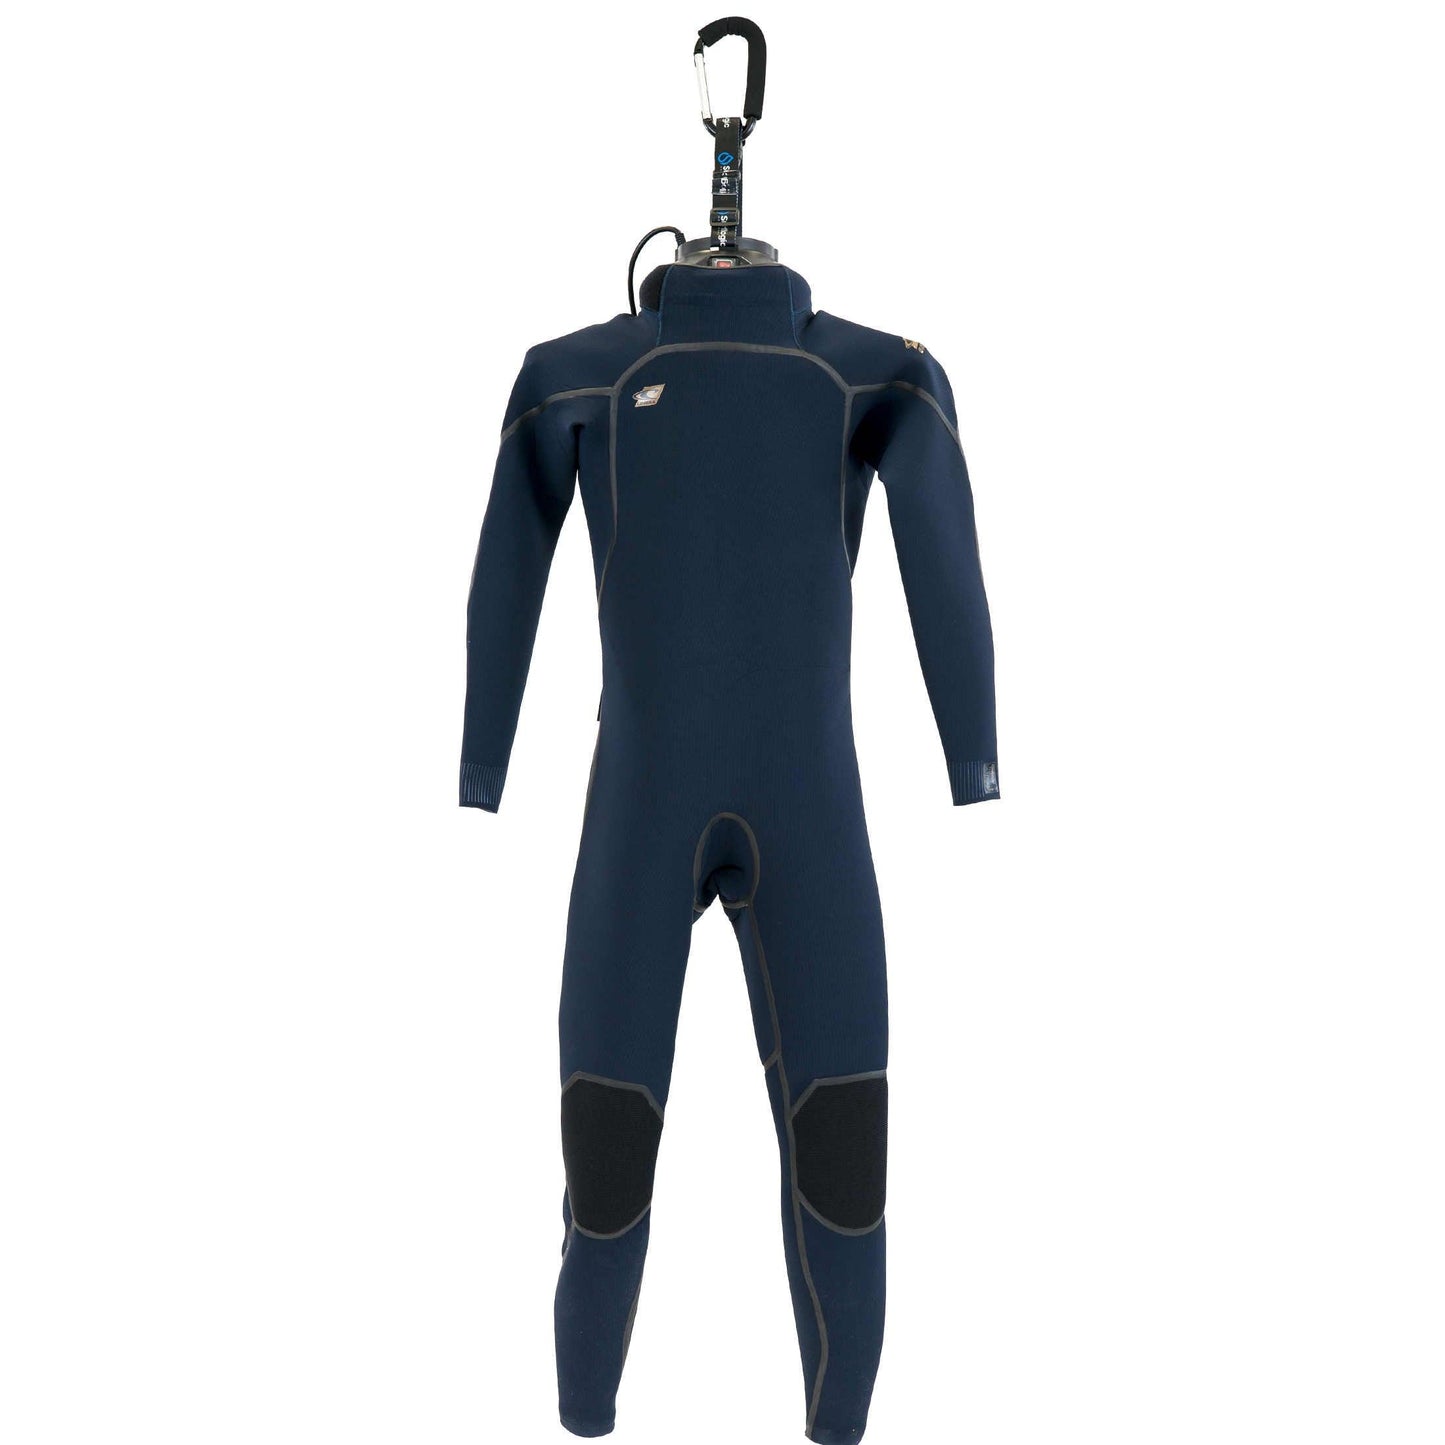 Surflogic Wetsuit Pro Dryer - Poole Harbour Watersports